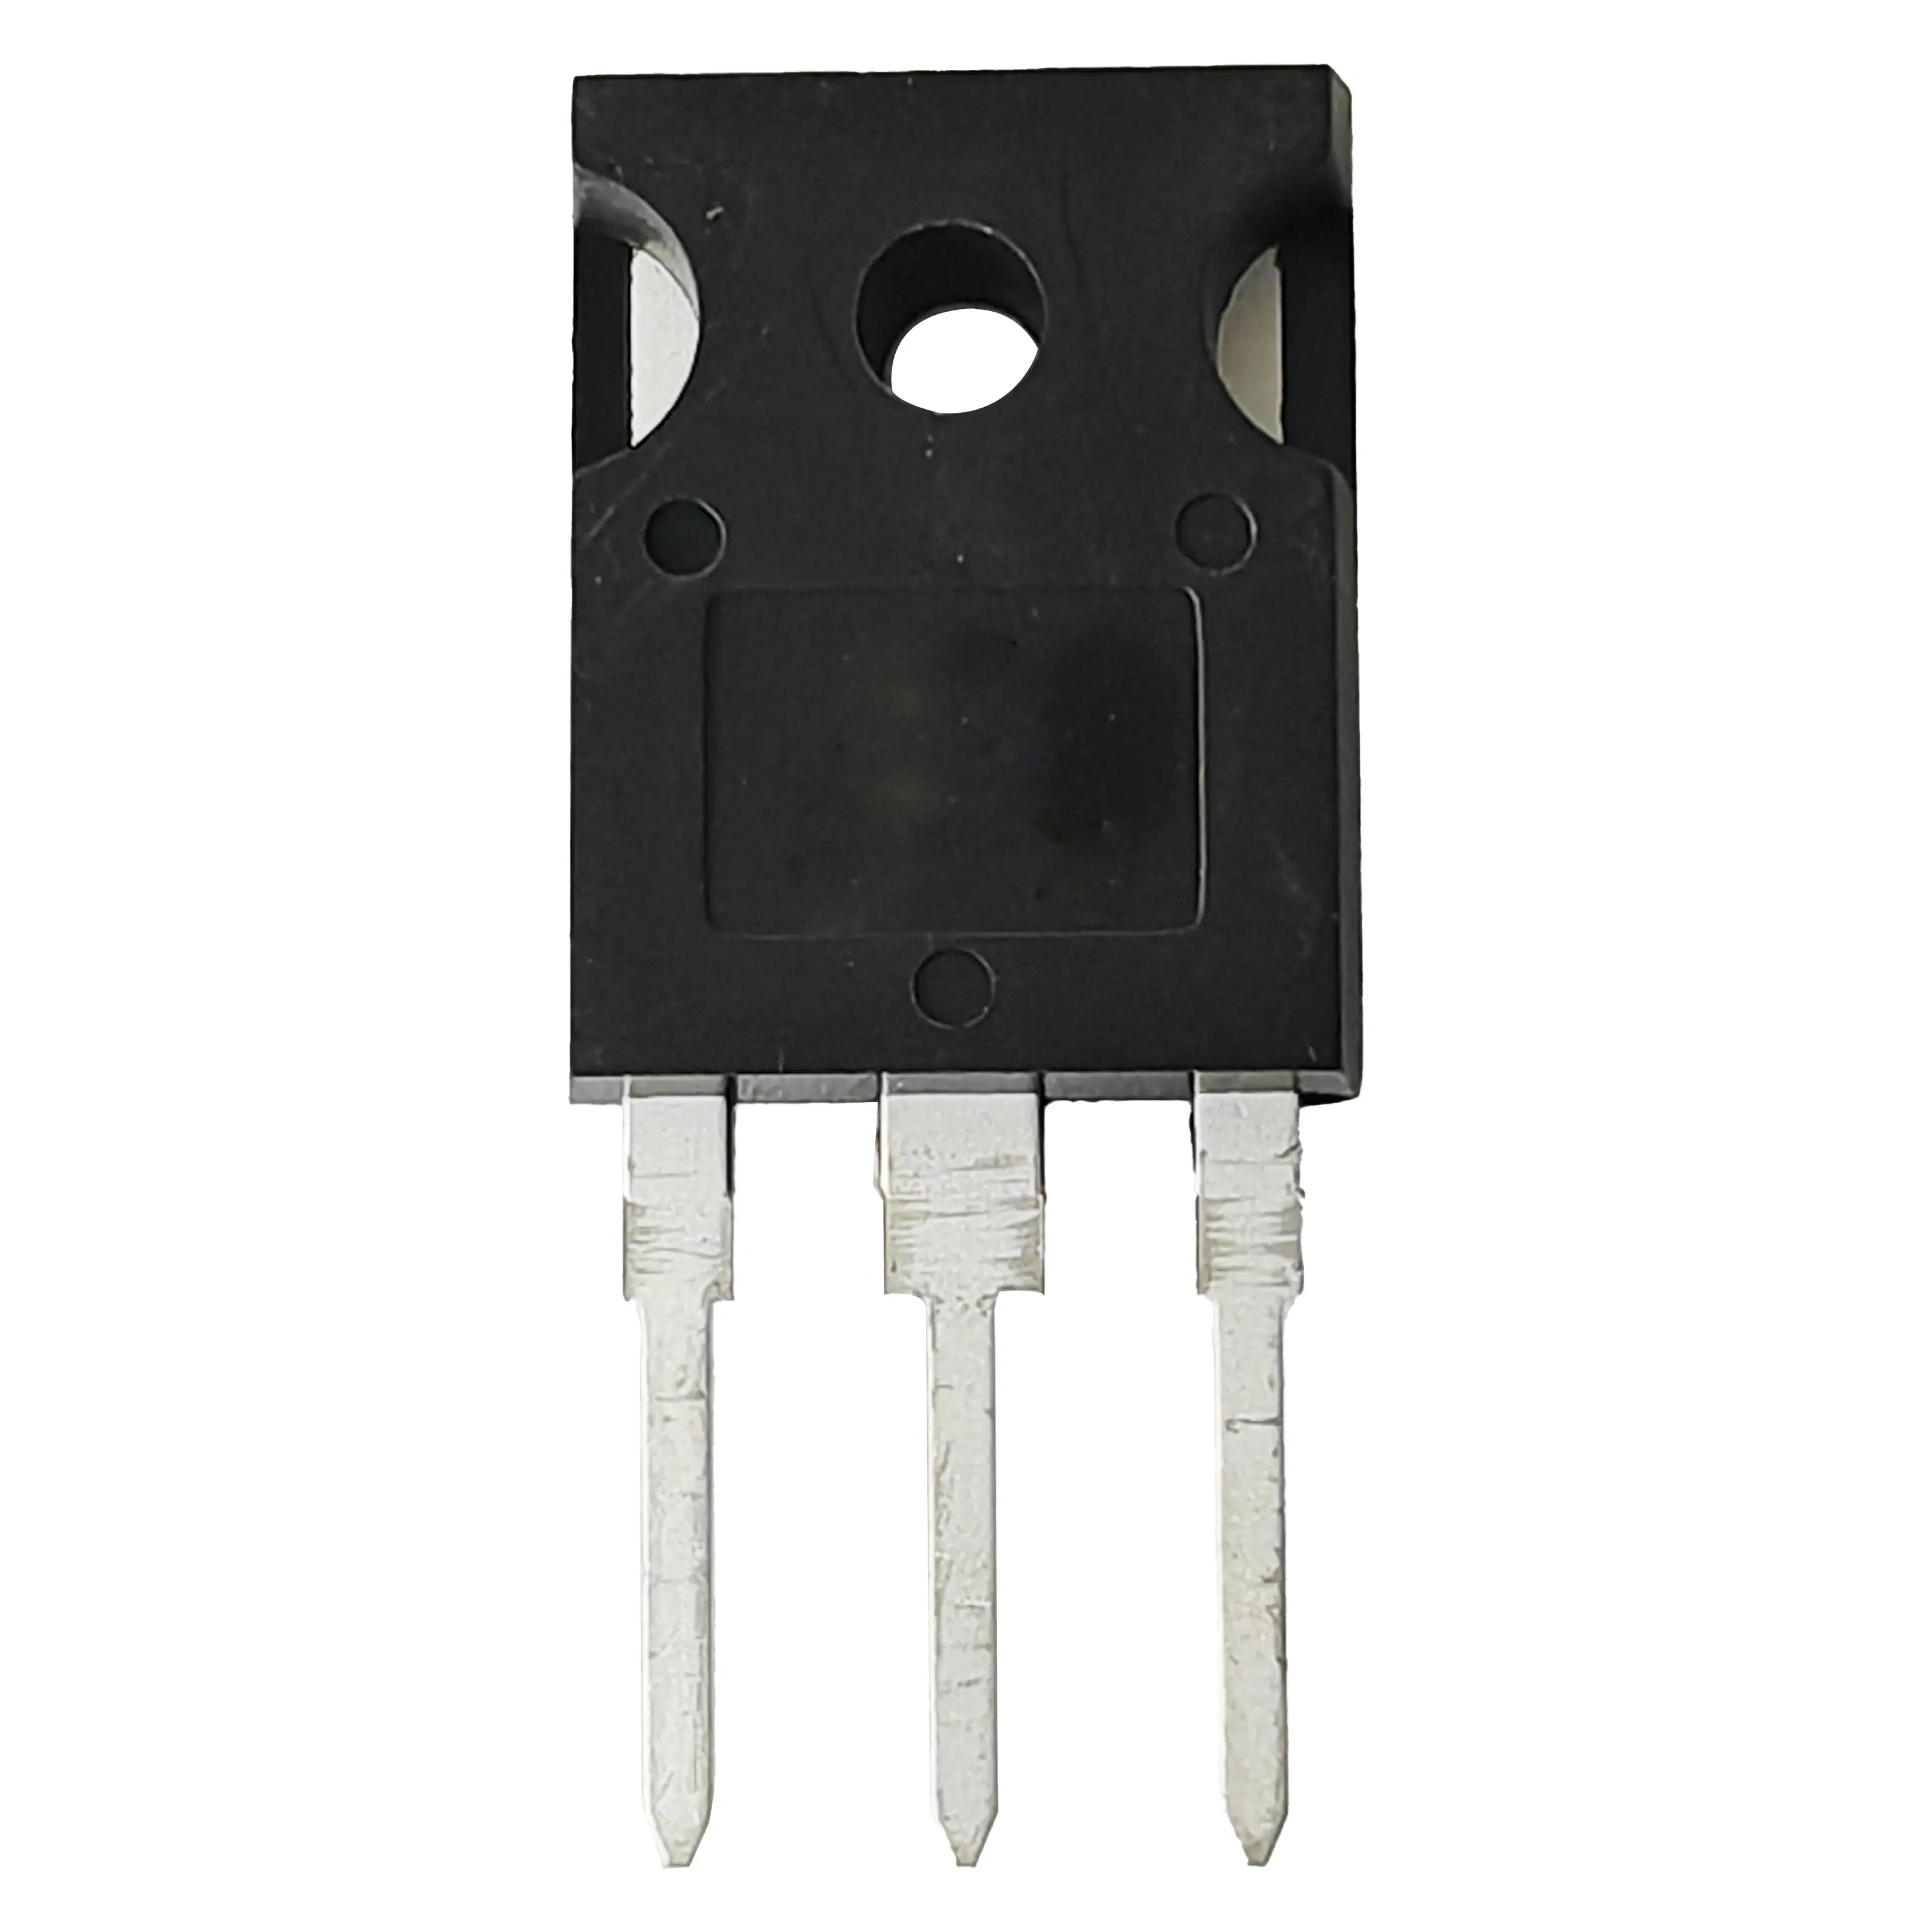 650V 40A Trench Field Stop IGBT Transistor With High Speed Switching And Low Eoff 0.15mJ For UPS And Welding Converters